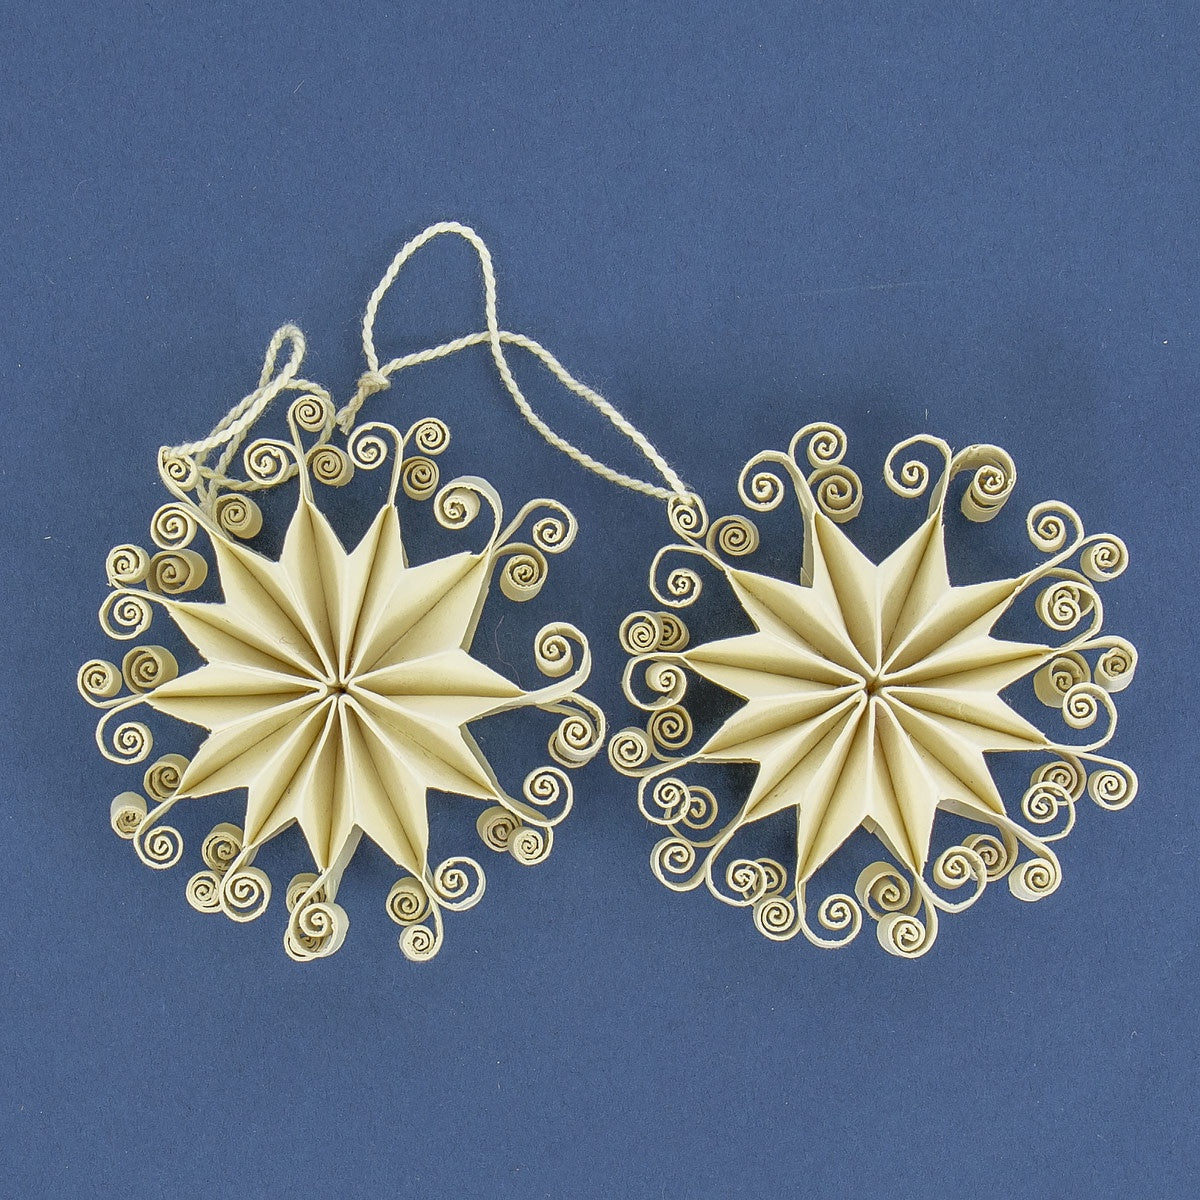 Whirling Star Ornaments - Beige